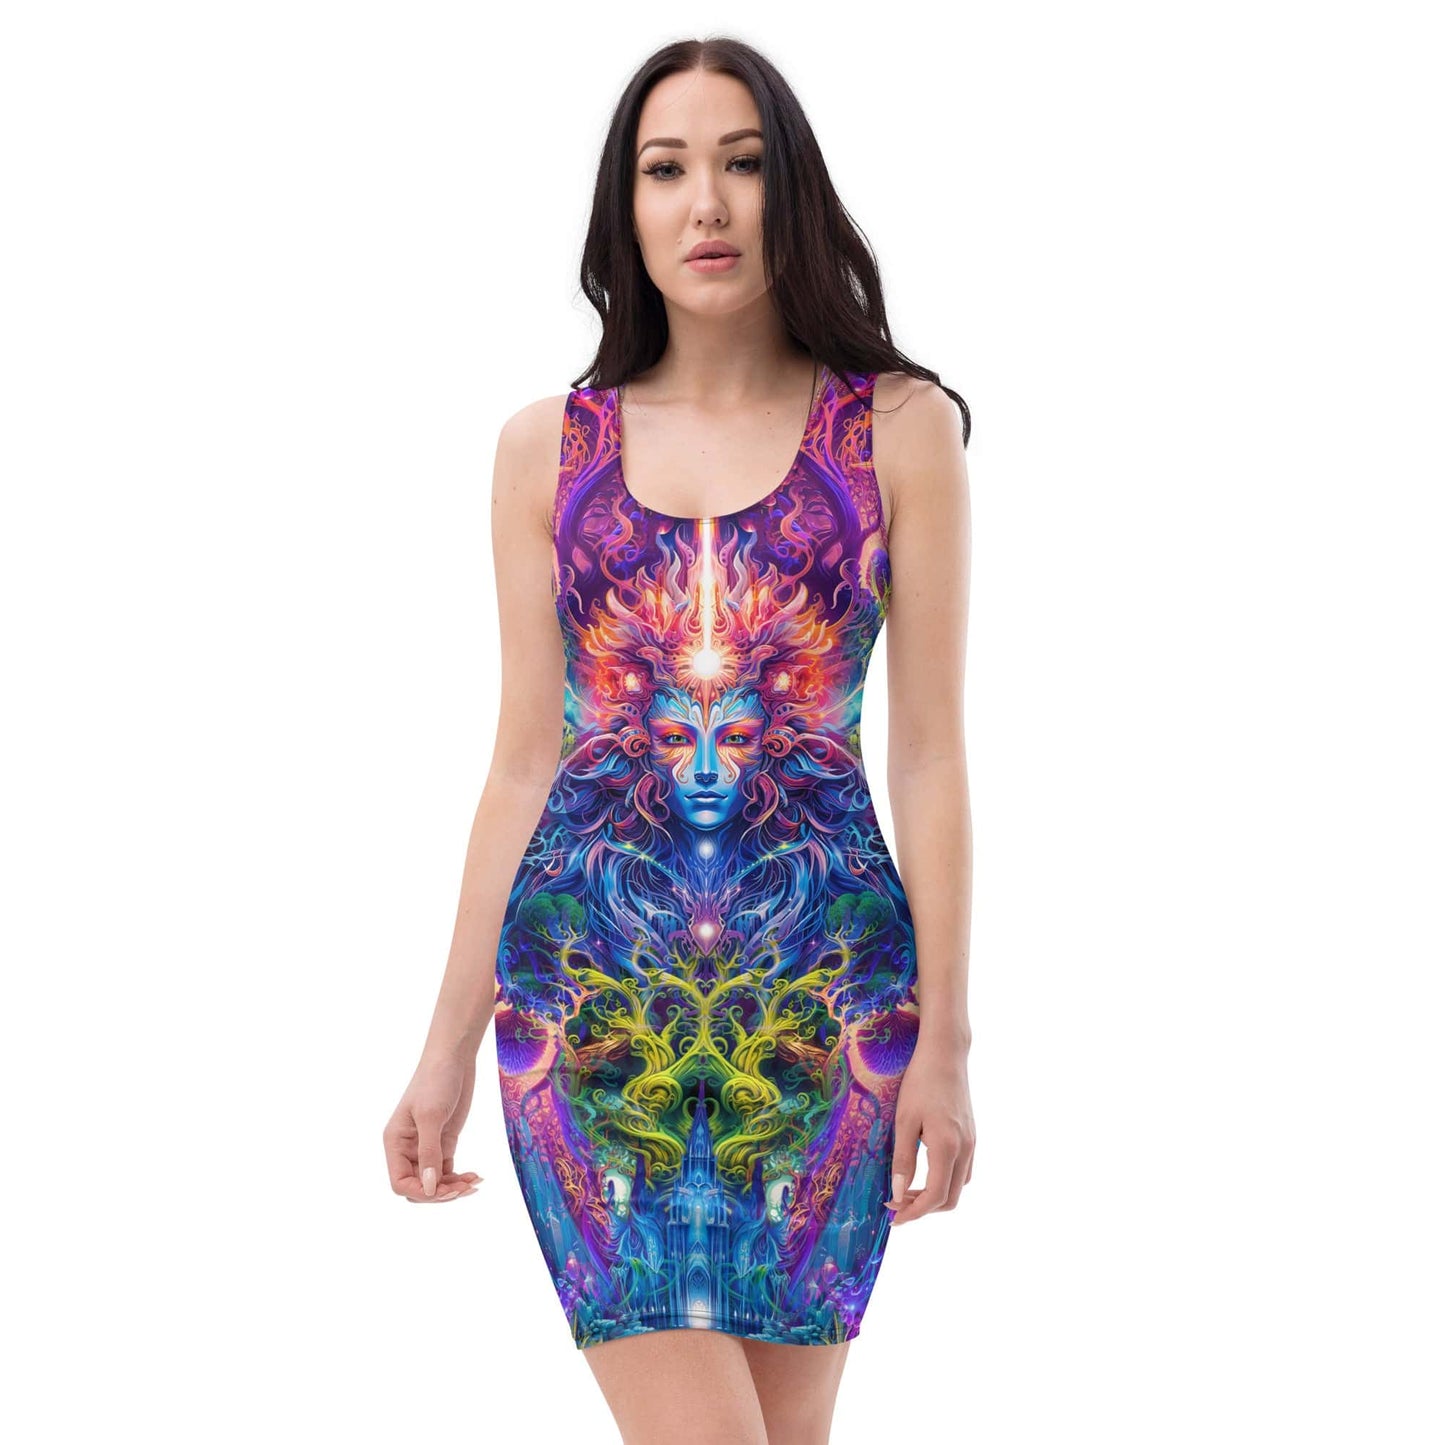 "The Sacred Vine" Bodycon FITTED DRESS